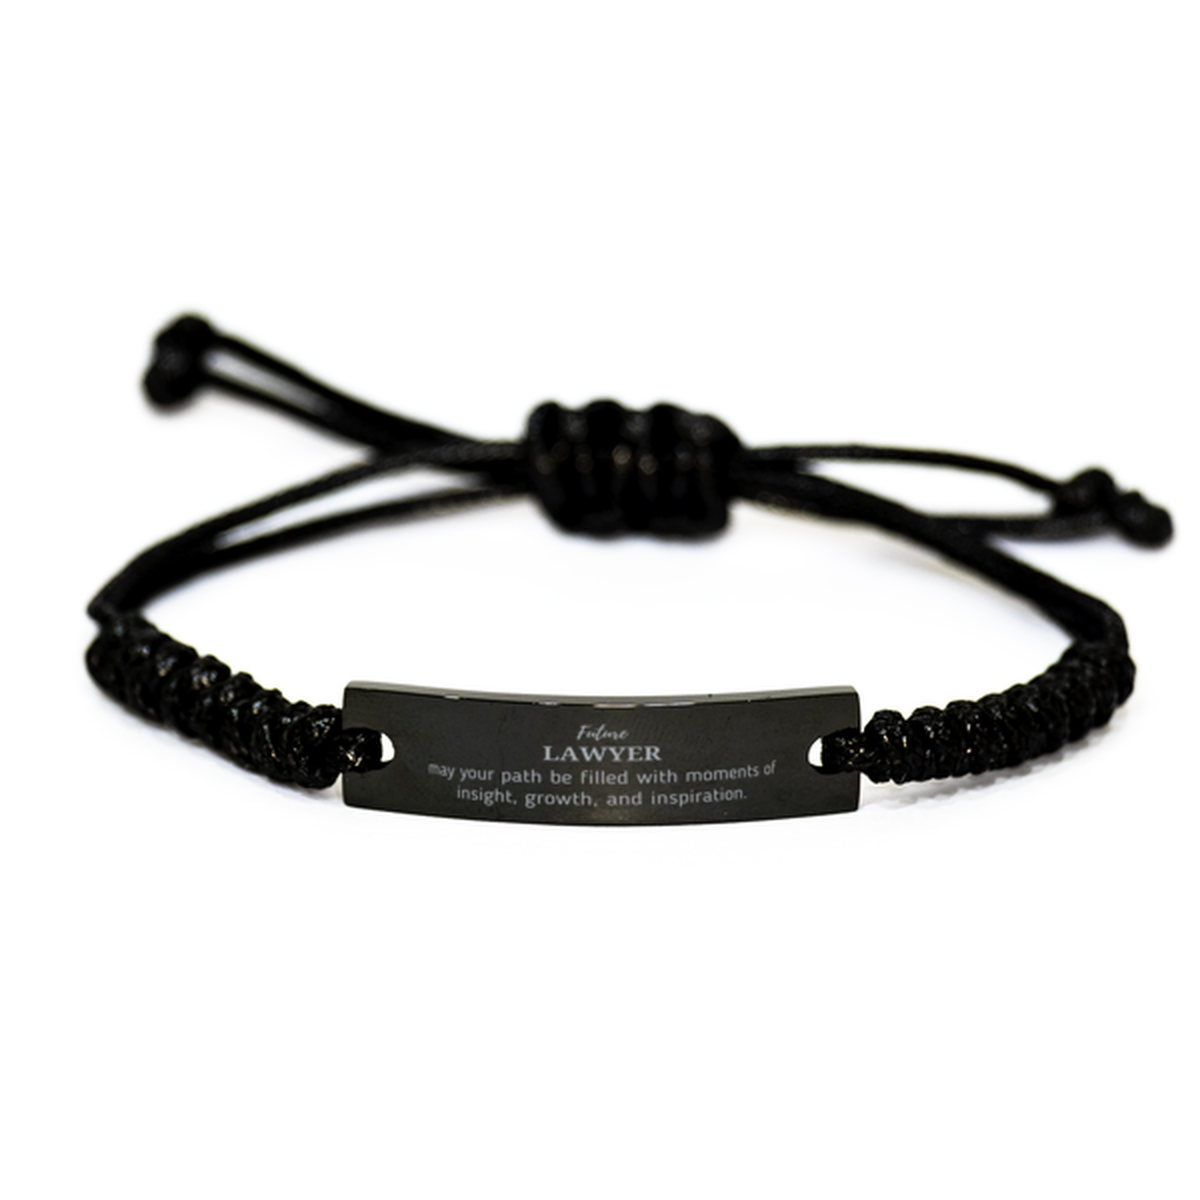 Future Lawyer Gifts, May your path be filled with moments of insight, Graduation Gifts for New Lawyer, Christmas Unique Black Rope Bracelet For Men, Women, Friends